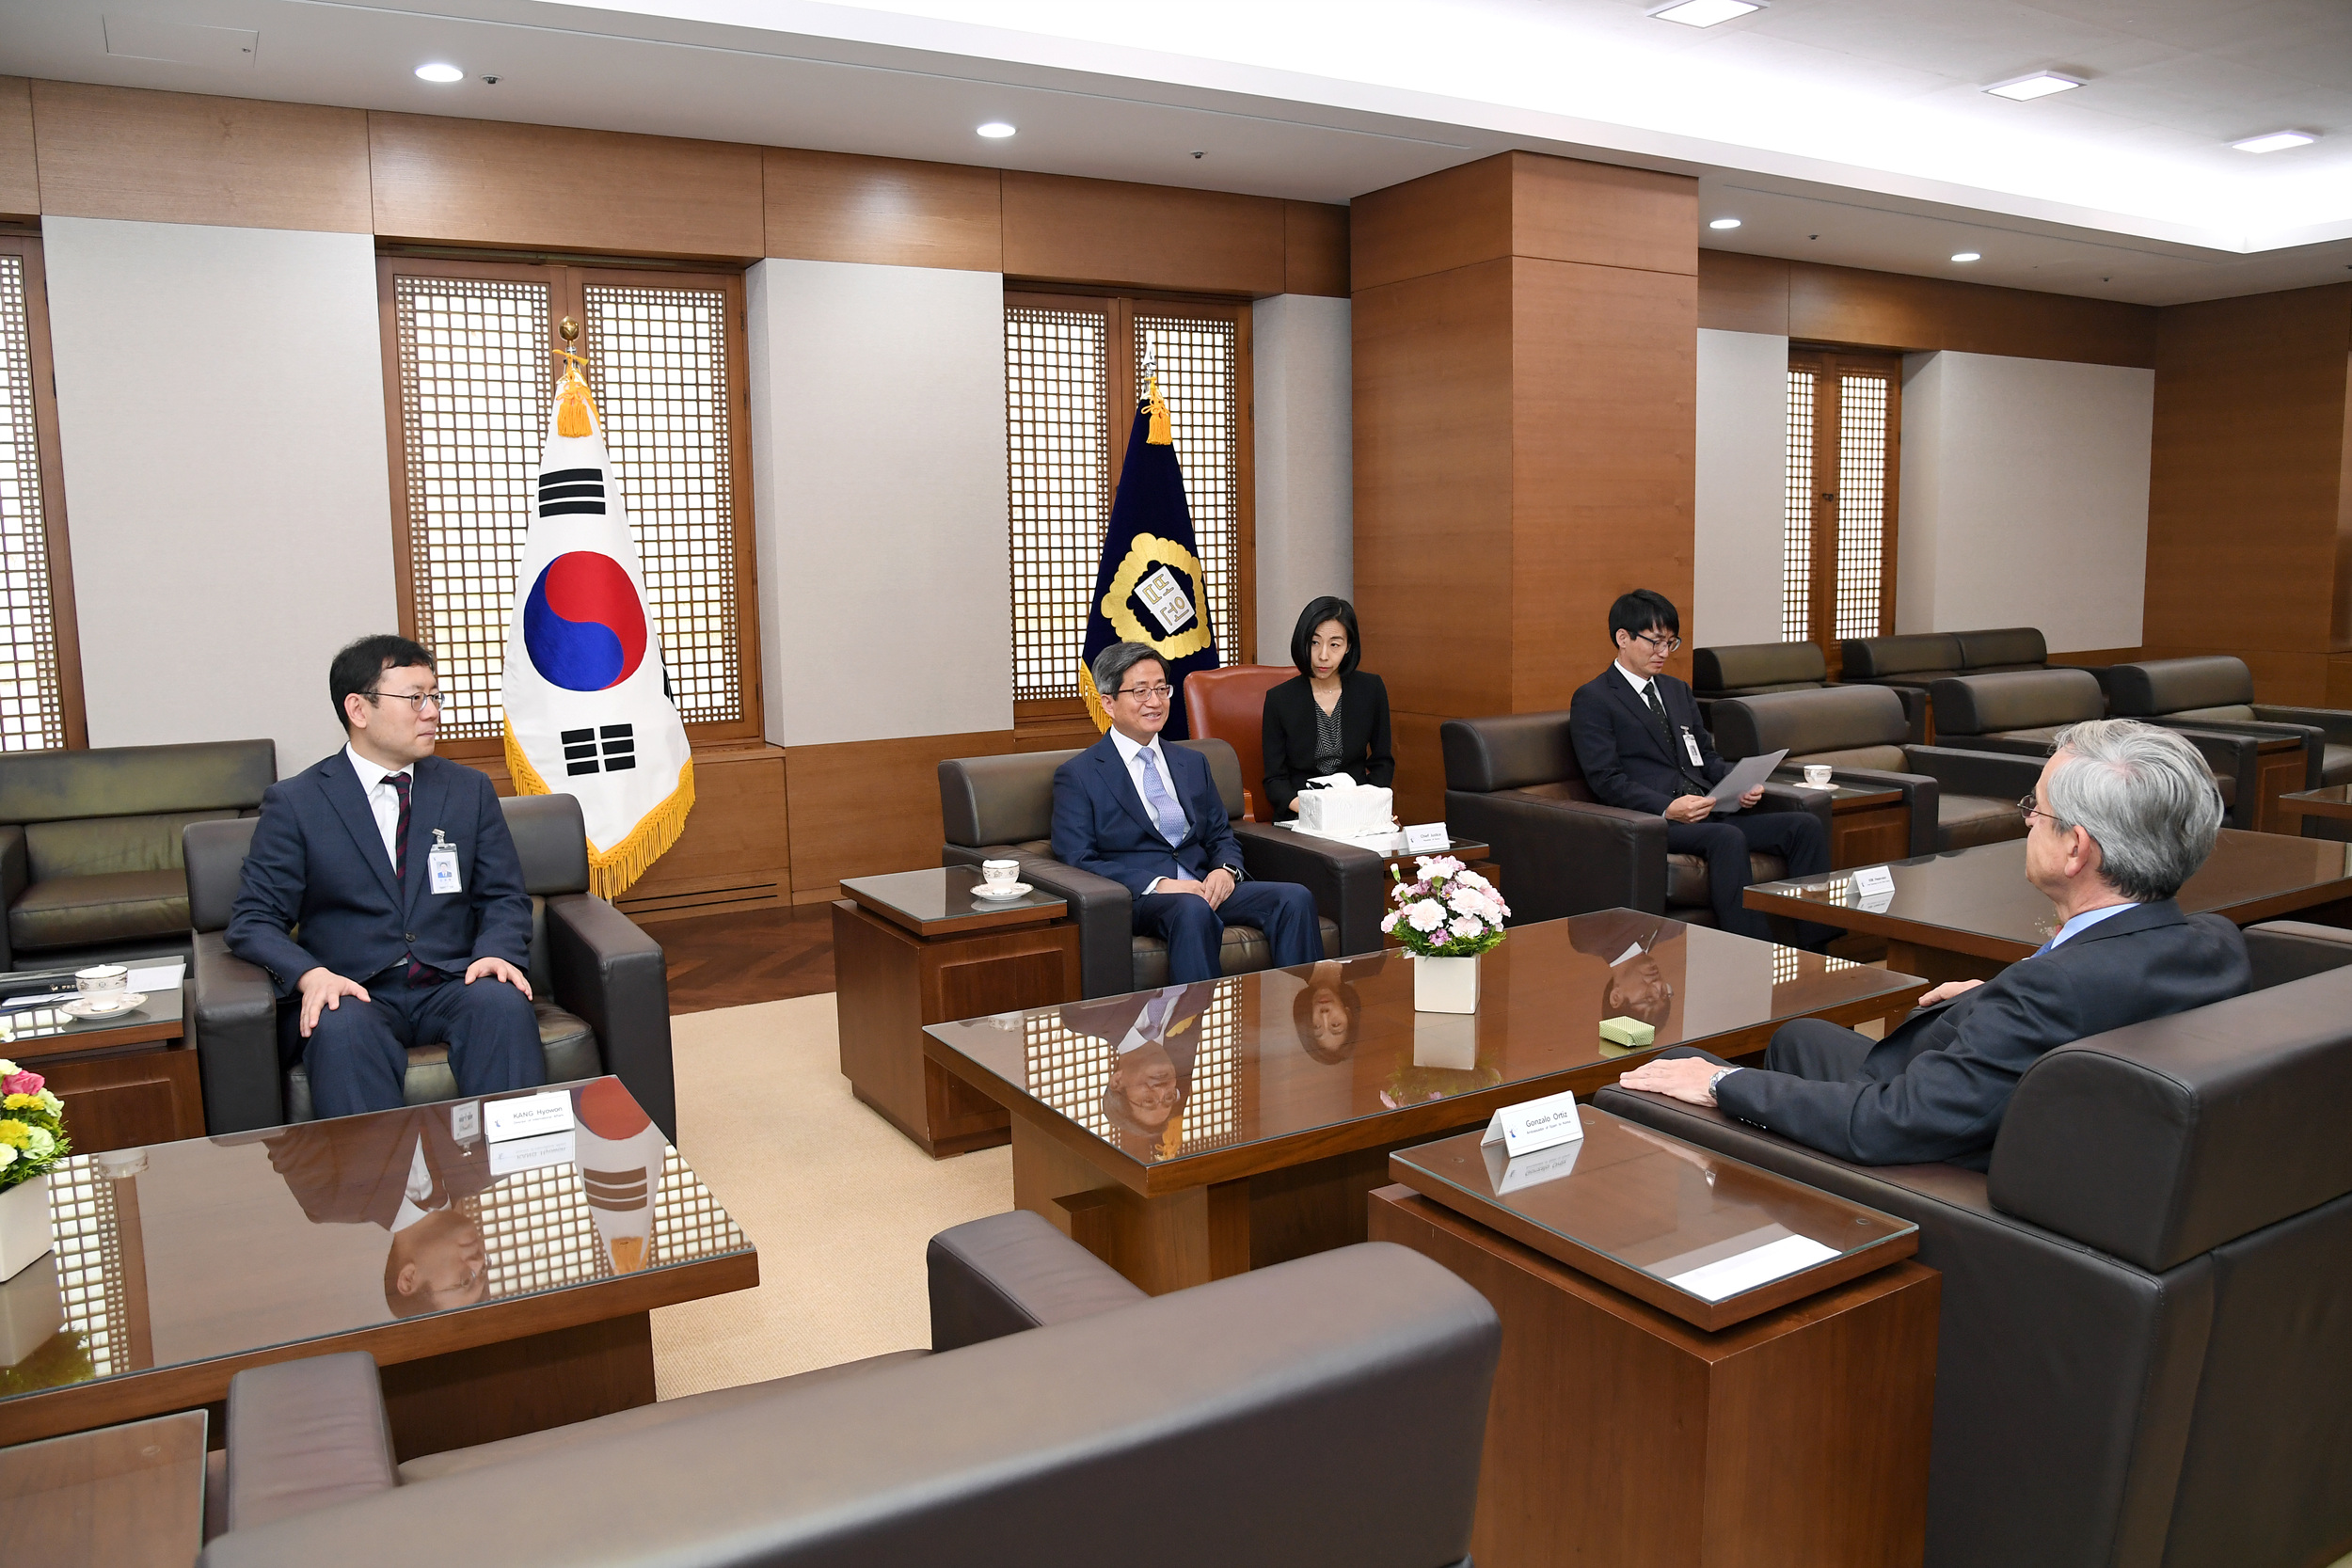 [6_14_18]Ambassador of Spain to Korea pays a courtesy call on the Chief Justice